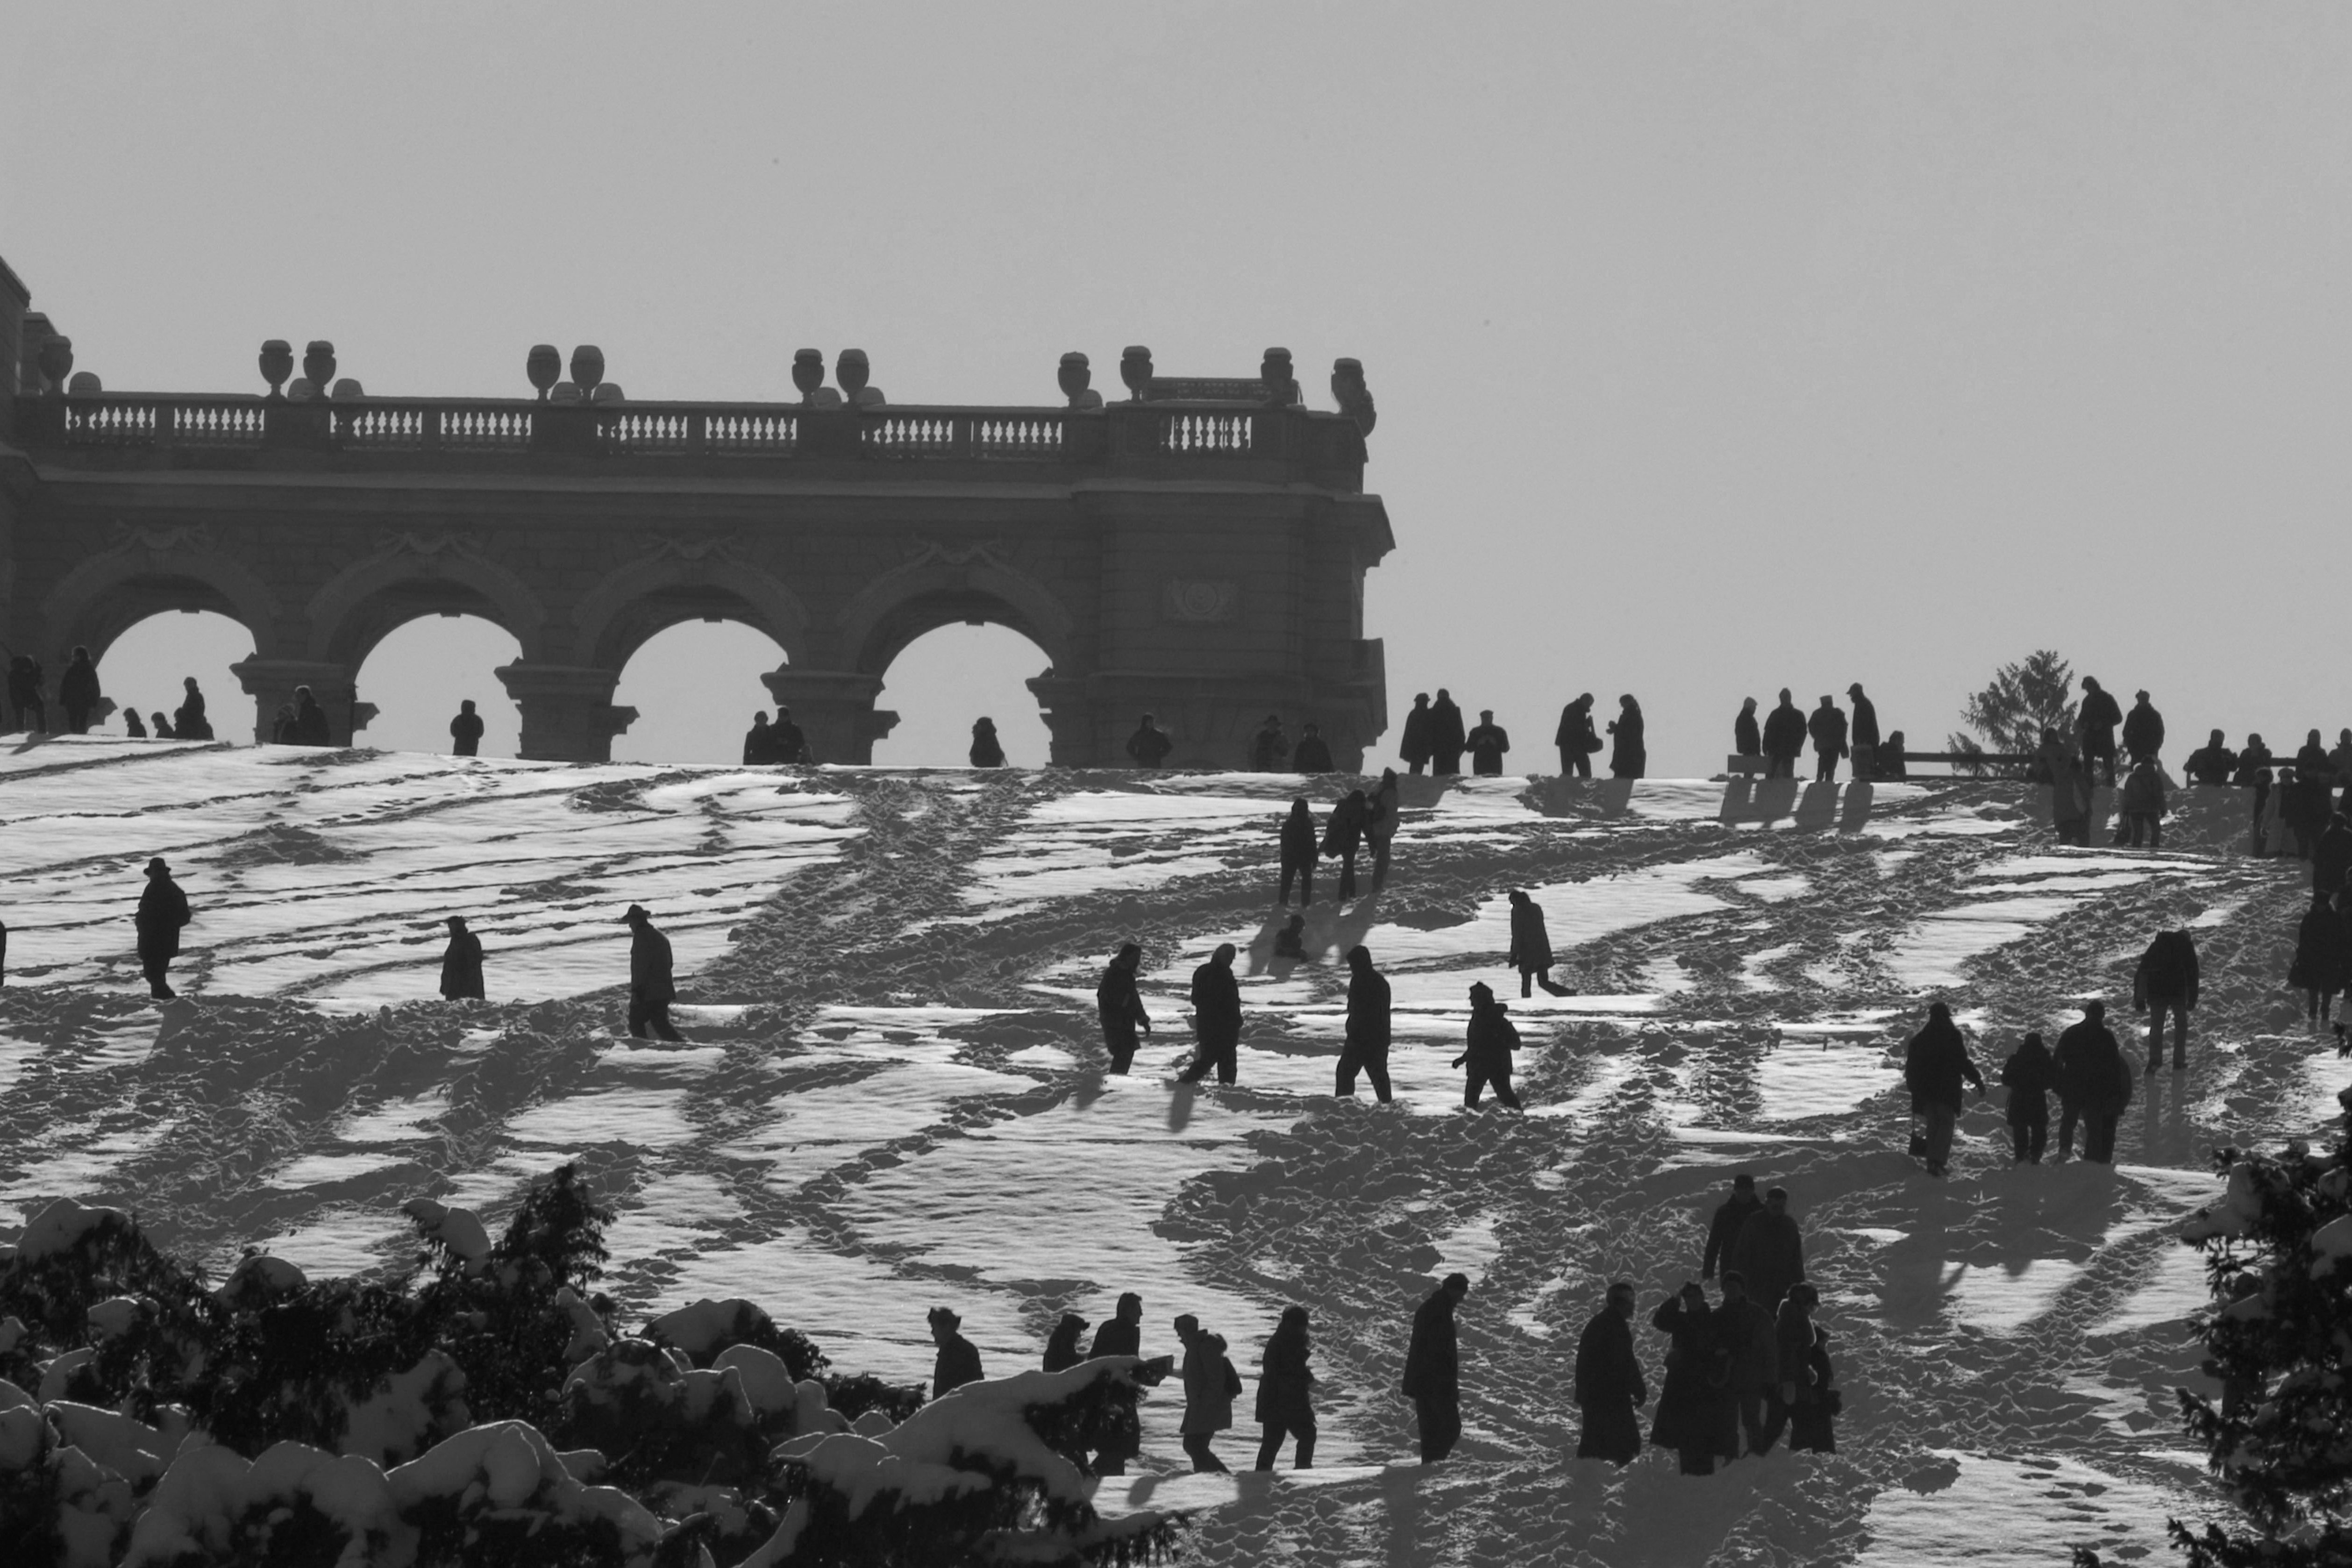 People walk in the snow up a hill crowned by baroque architecture.